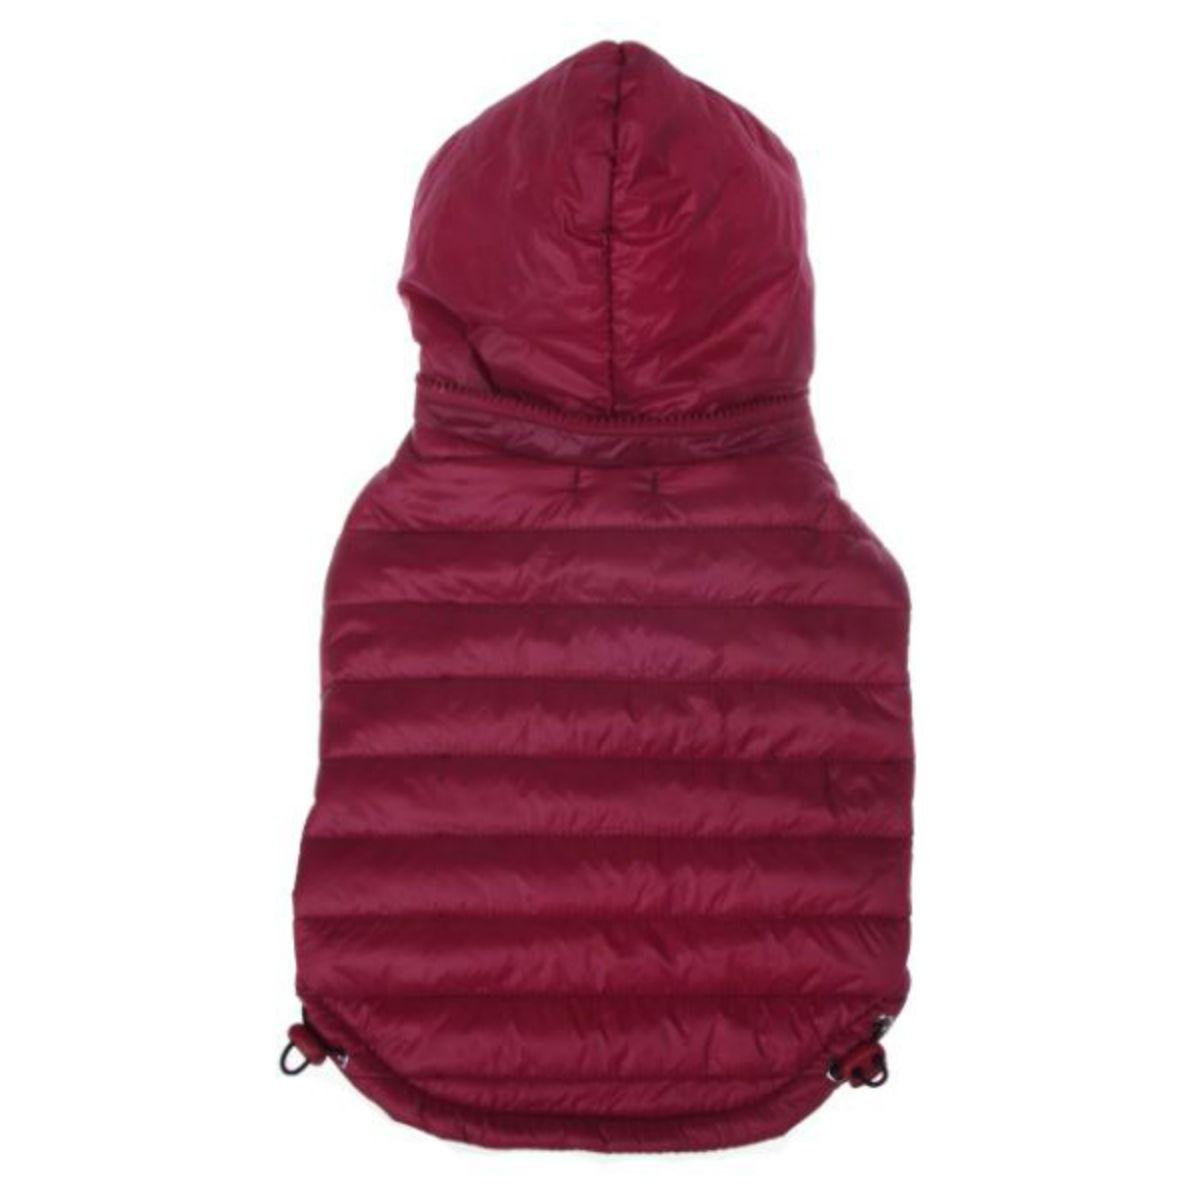 Pet Life Sporty Avalanche Dog Coat - Burgundy Red